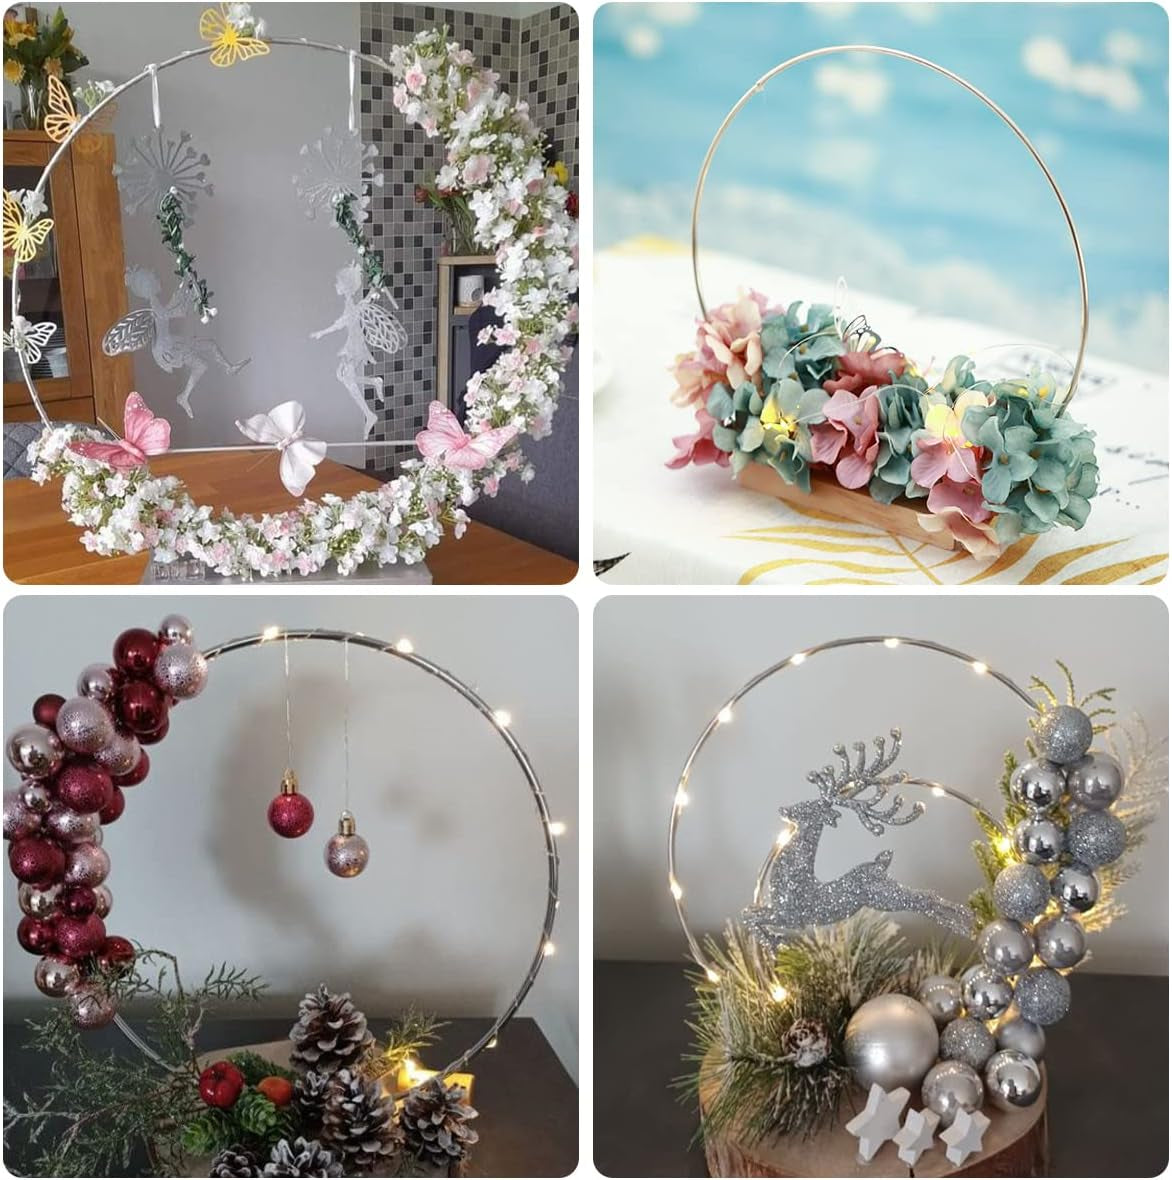 12 Pack Floral Hoop with Holders and LED Fairy Lights 18 Inch Metal Rings for DIY Centerpiece Table Decorations Crafts Macrame Rings Hoop Wreath Dream Catcher Rings Wedding Christmas Wreaths, Silver